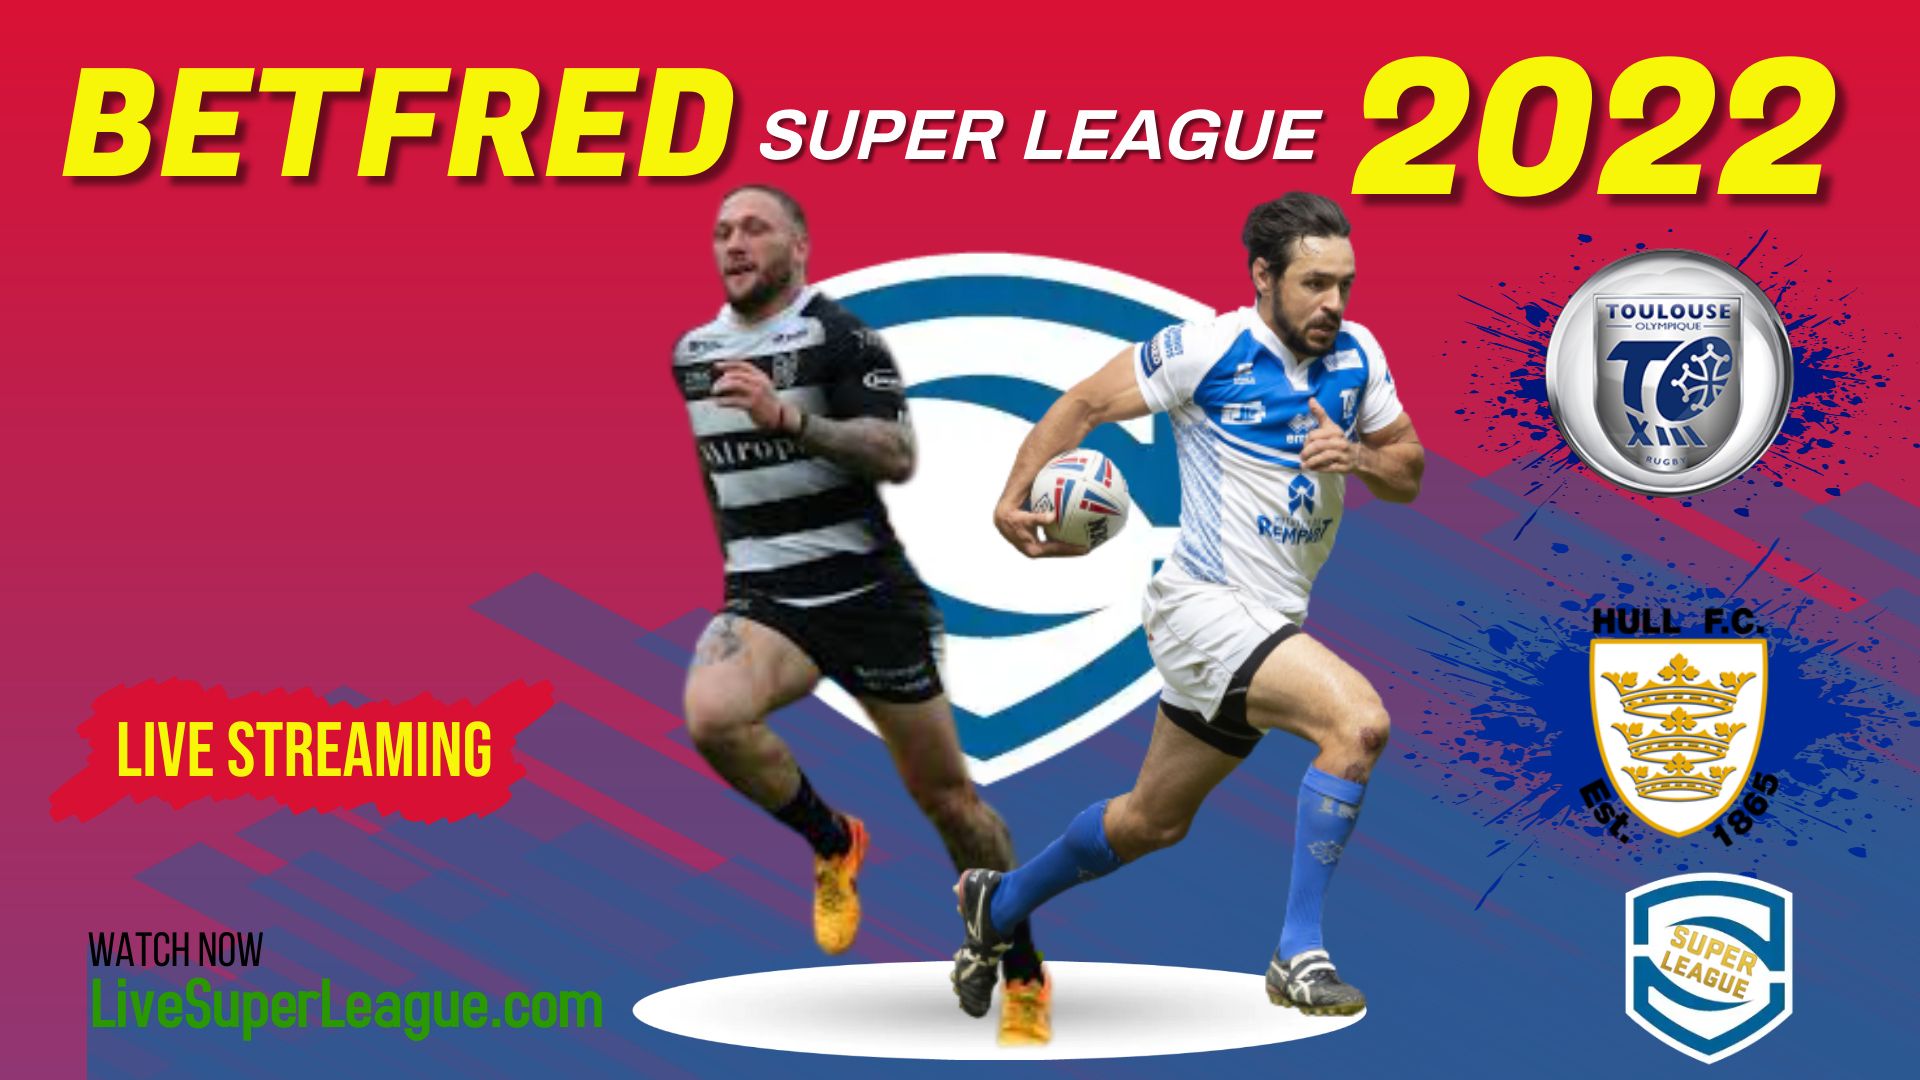 Hull FC Vs Toulouse RD 26 Live Stream 2022 | Full Match Replay